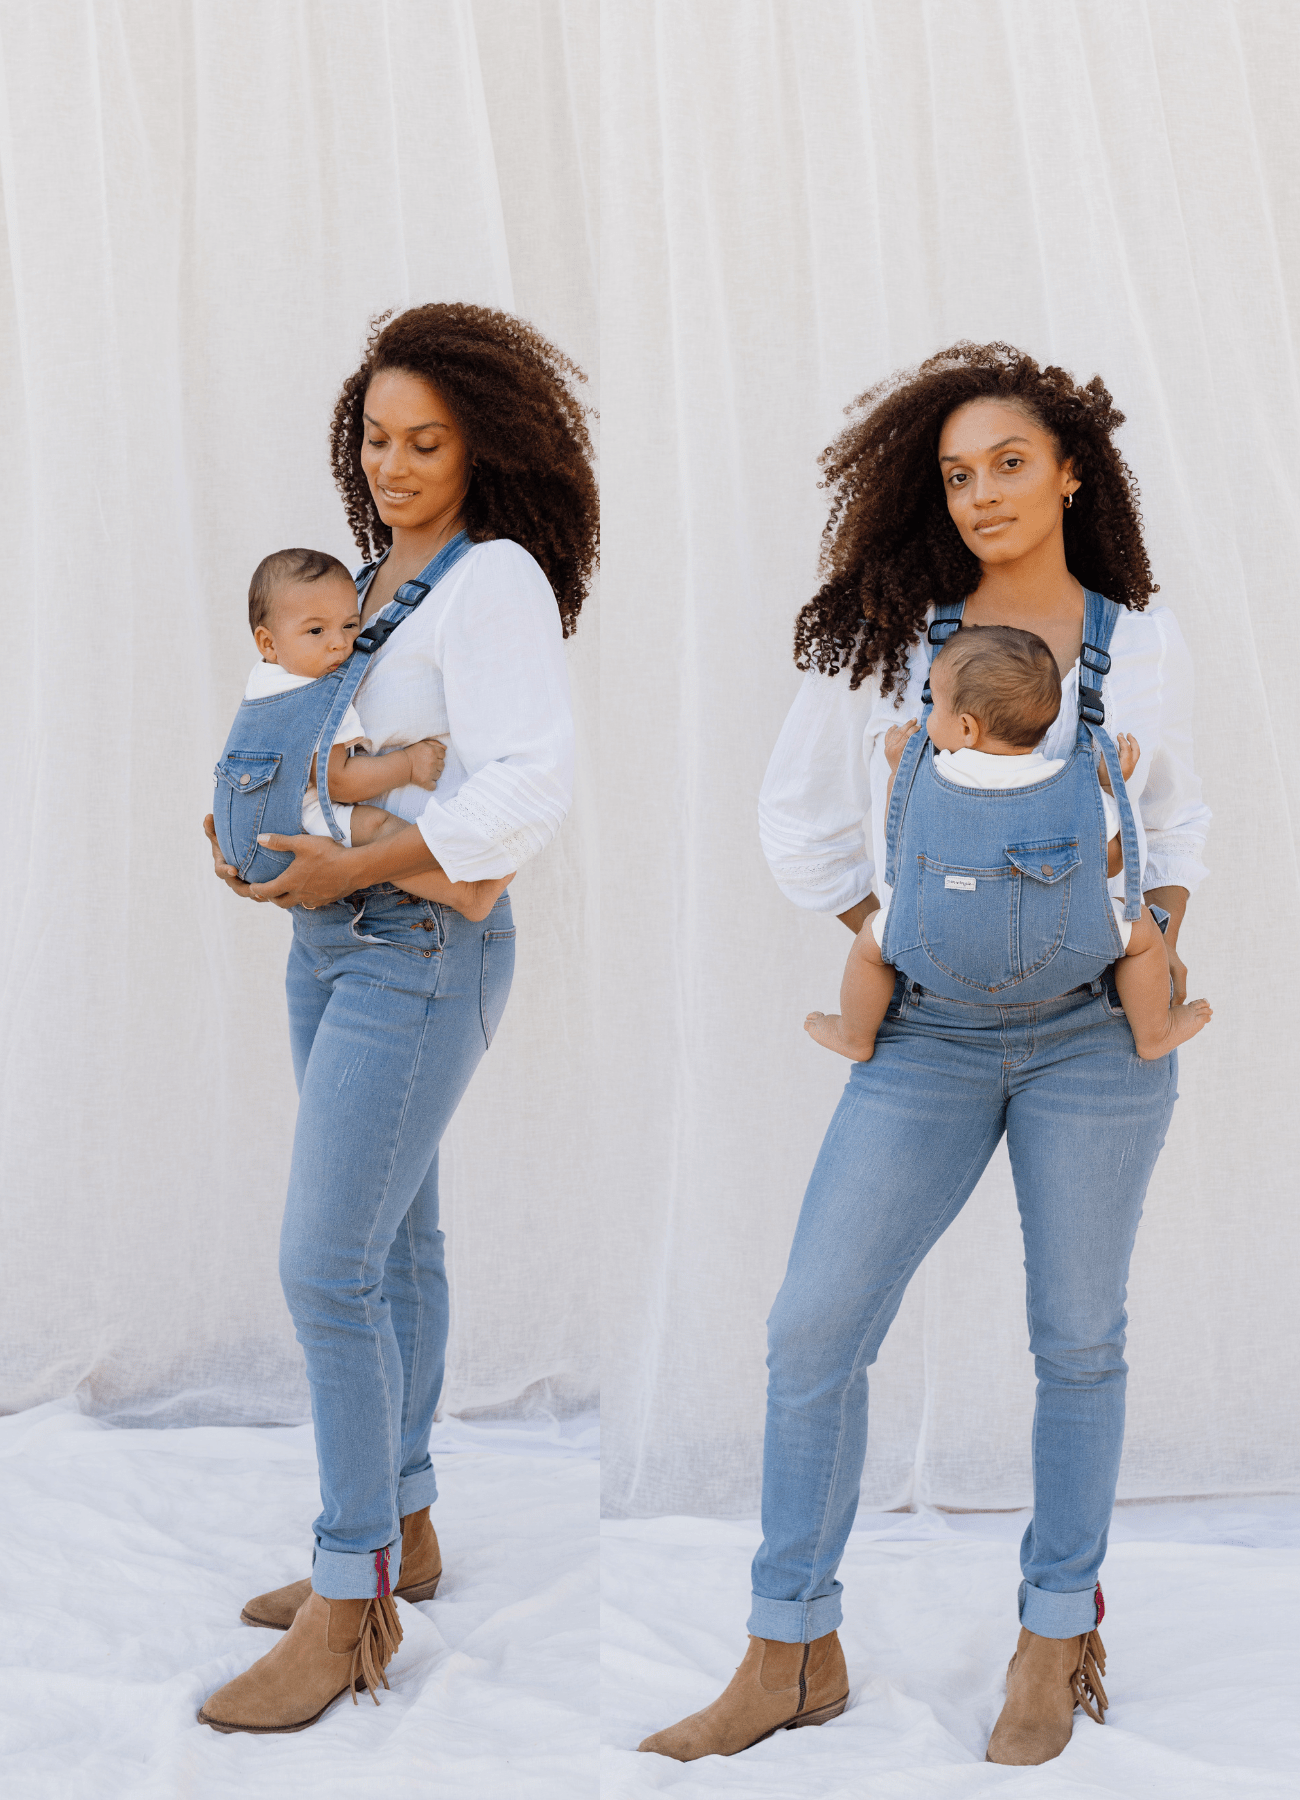 the classic original - the mumsie baby wearing overalls maternity baby carrier pregnancy